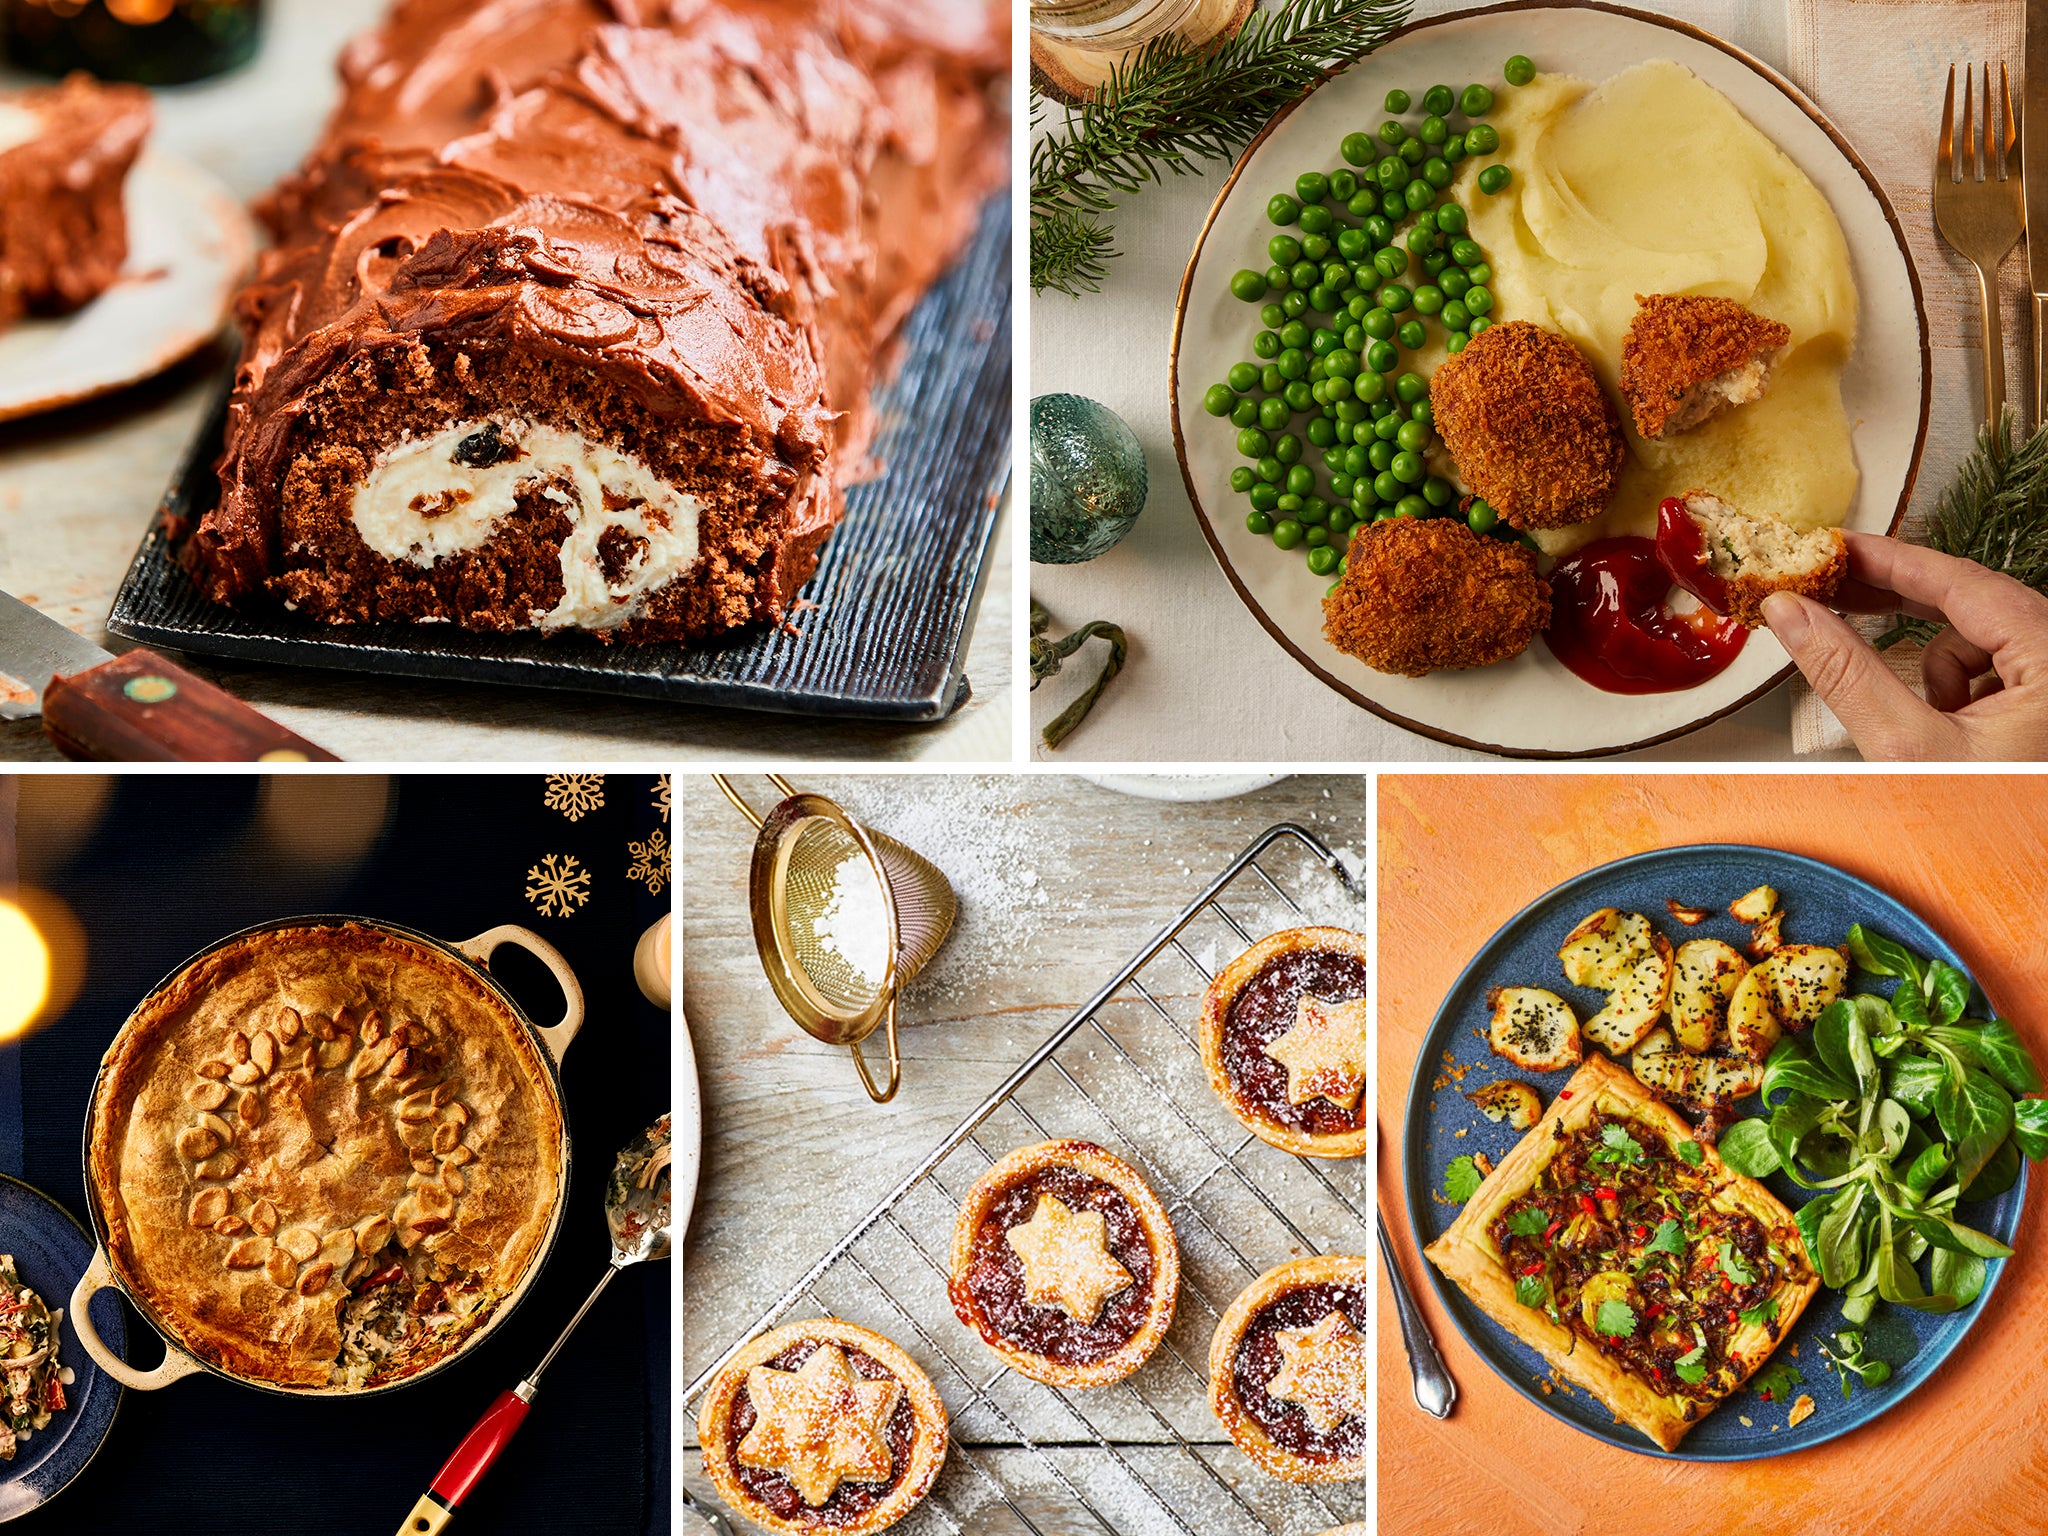 These recipes require minimal effort so you can focus on the important things this year